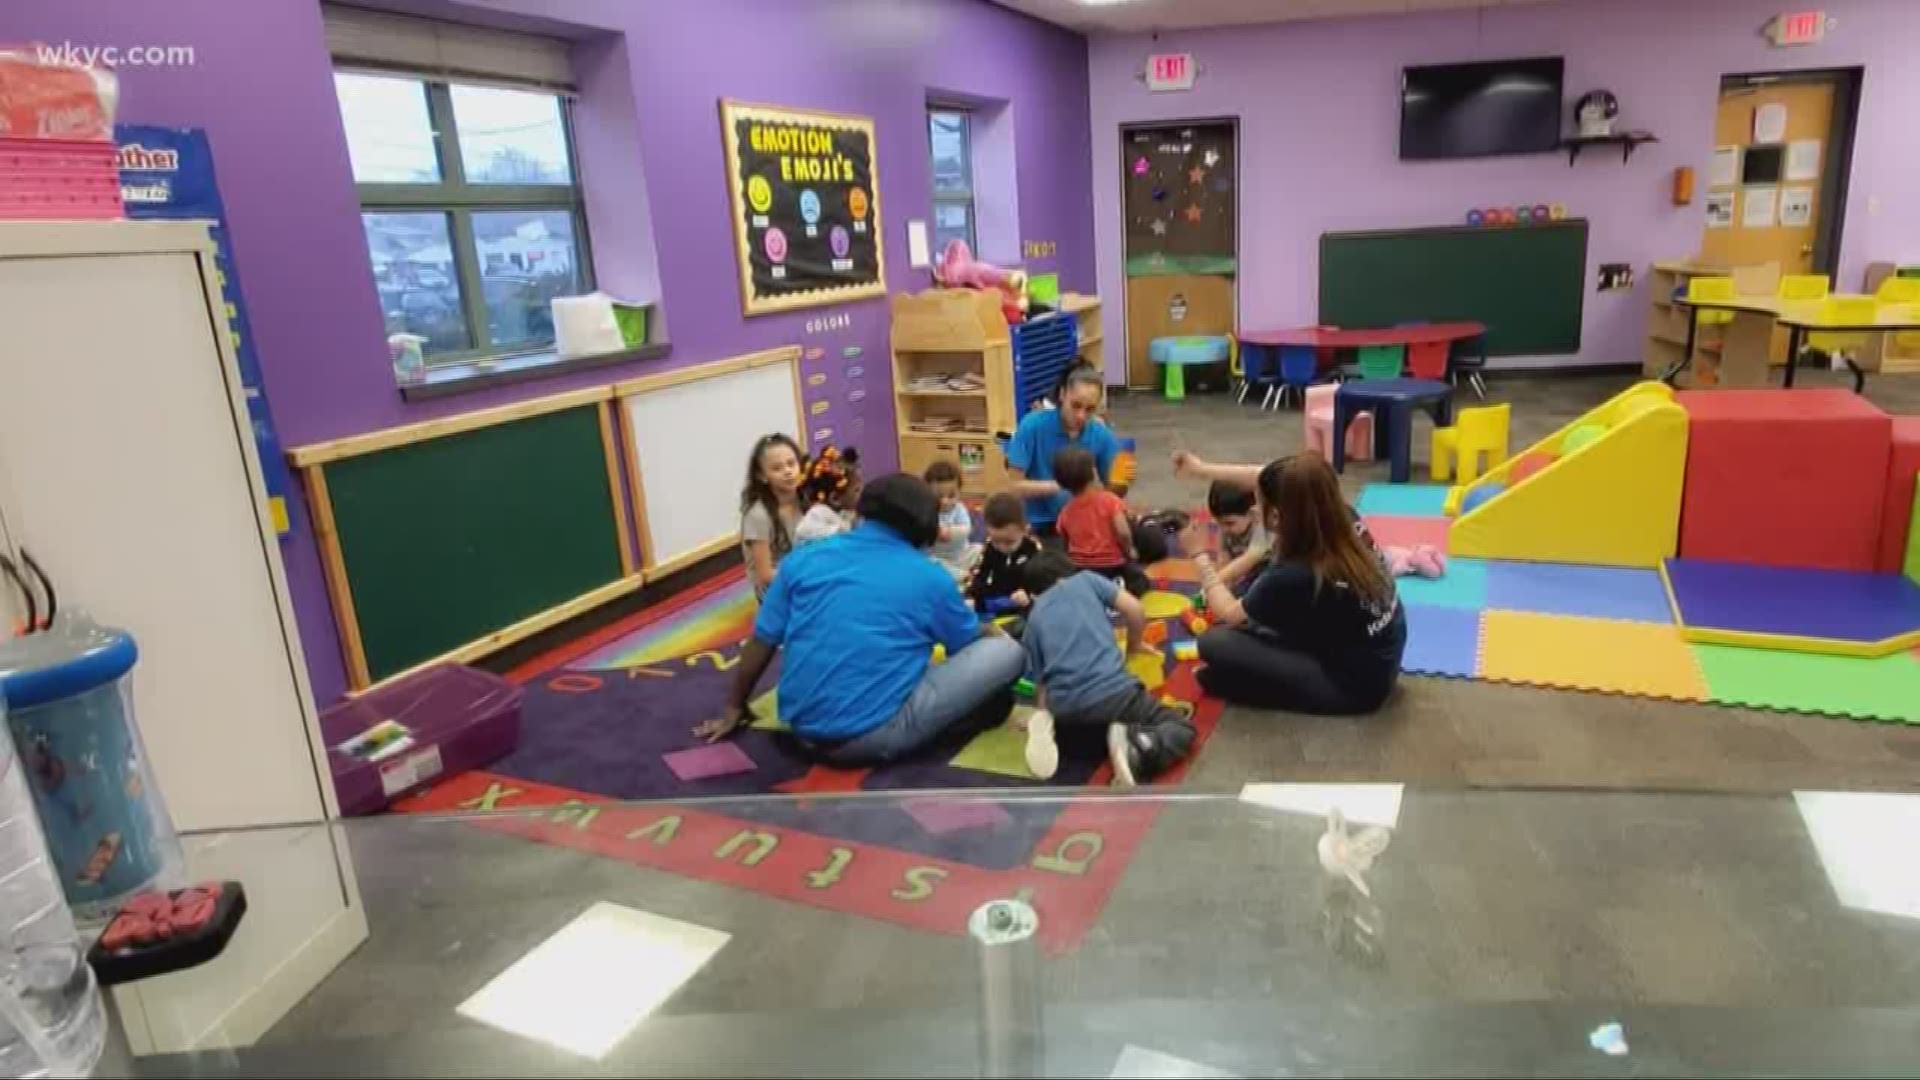 'To close daycares overnight won’t work, but it’s coming,' Gov. Mike DeWine said. Lynna Lai reports.